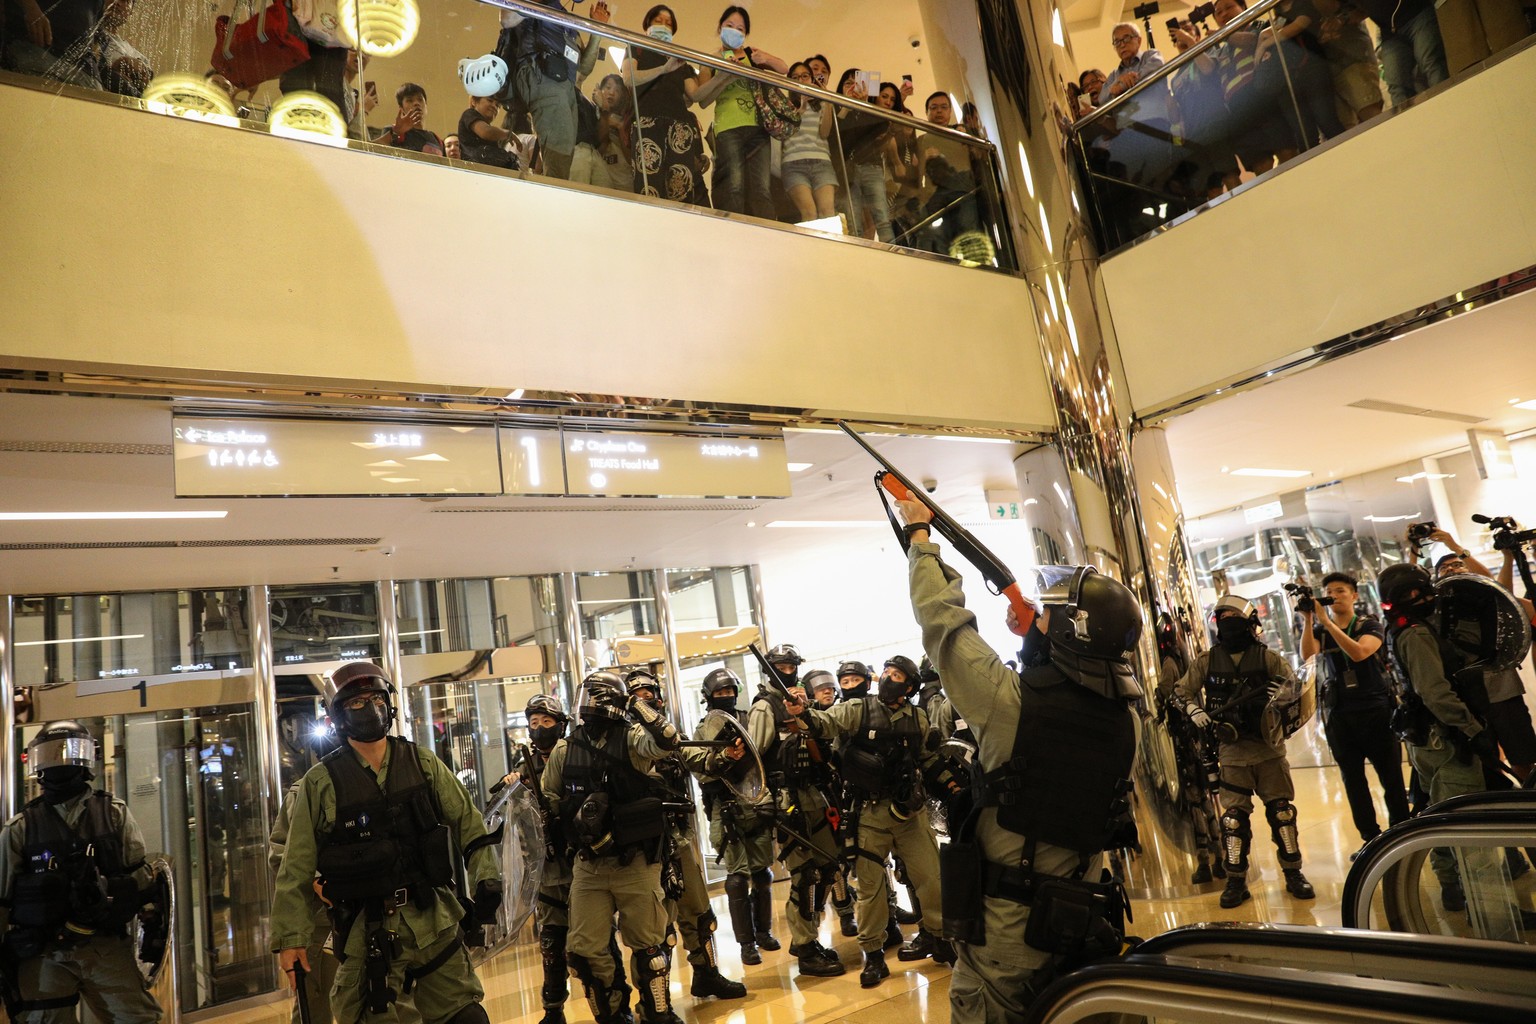 epa07969316 Riot police arrive to a shopping mall to disperse protesters during a rally against police brutality in Hong Kong, China, 03 November 2019. Hong Kong has entered a 22nd week of ongoing mas ...